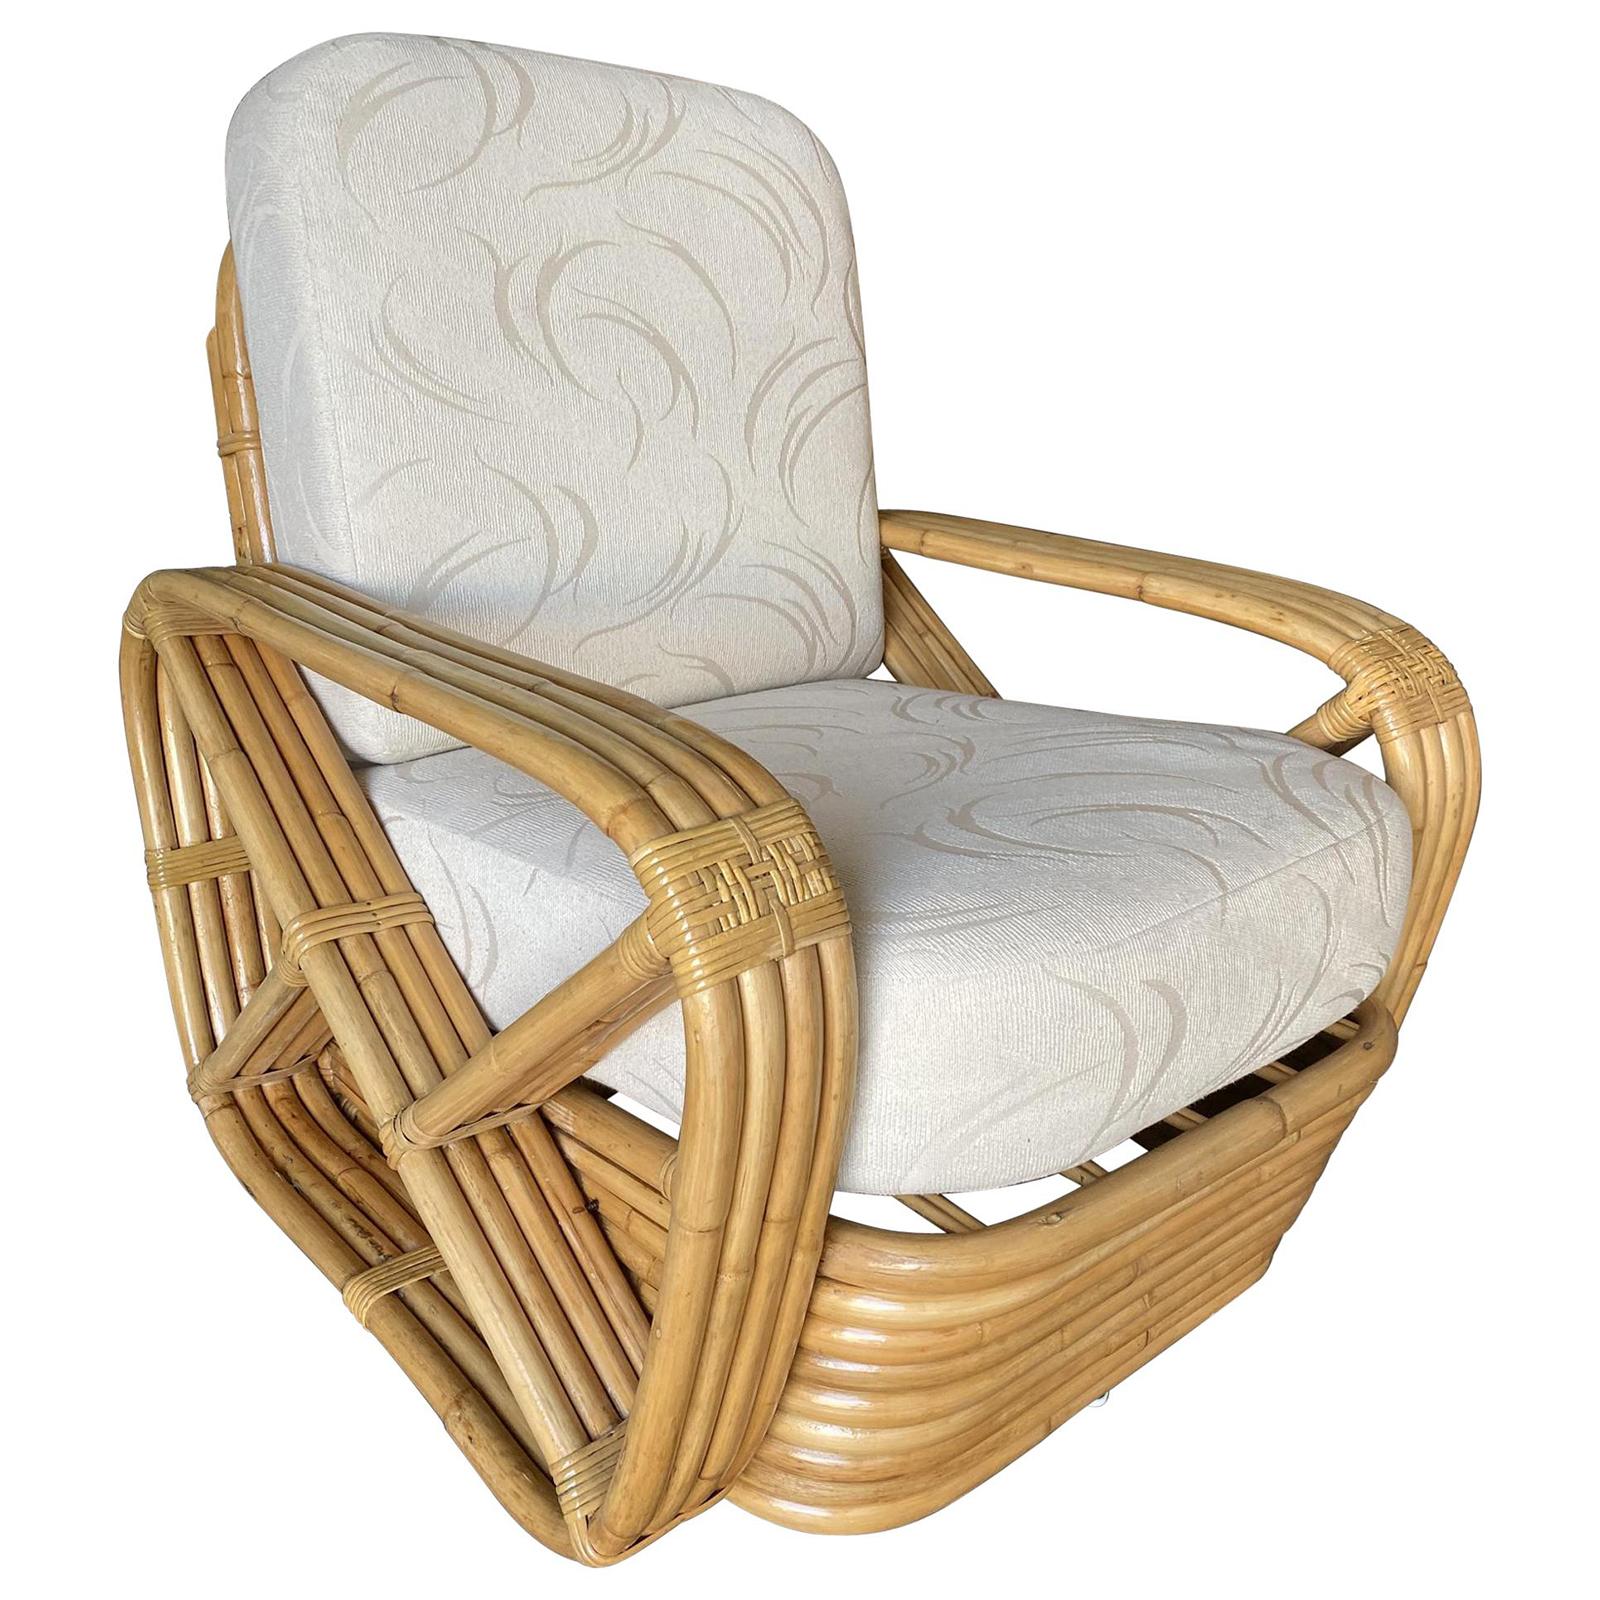 Paul Frankl four-strand square pretzel rattan arm lounge chair. This chair dates from 1934. This chair is a Paul Frankl original. This comes directly from a Paul Frankl-decorated house located in Los Angeles and is documented.

Custom cushions